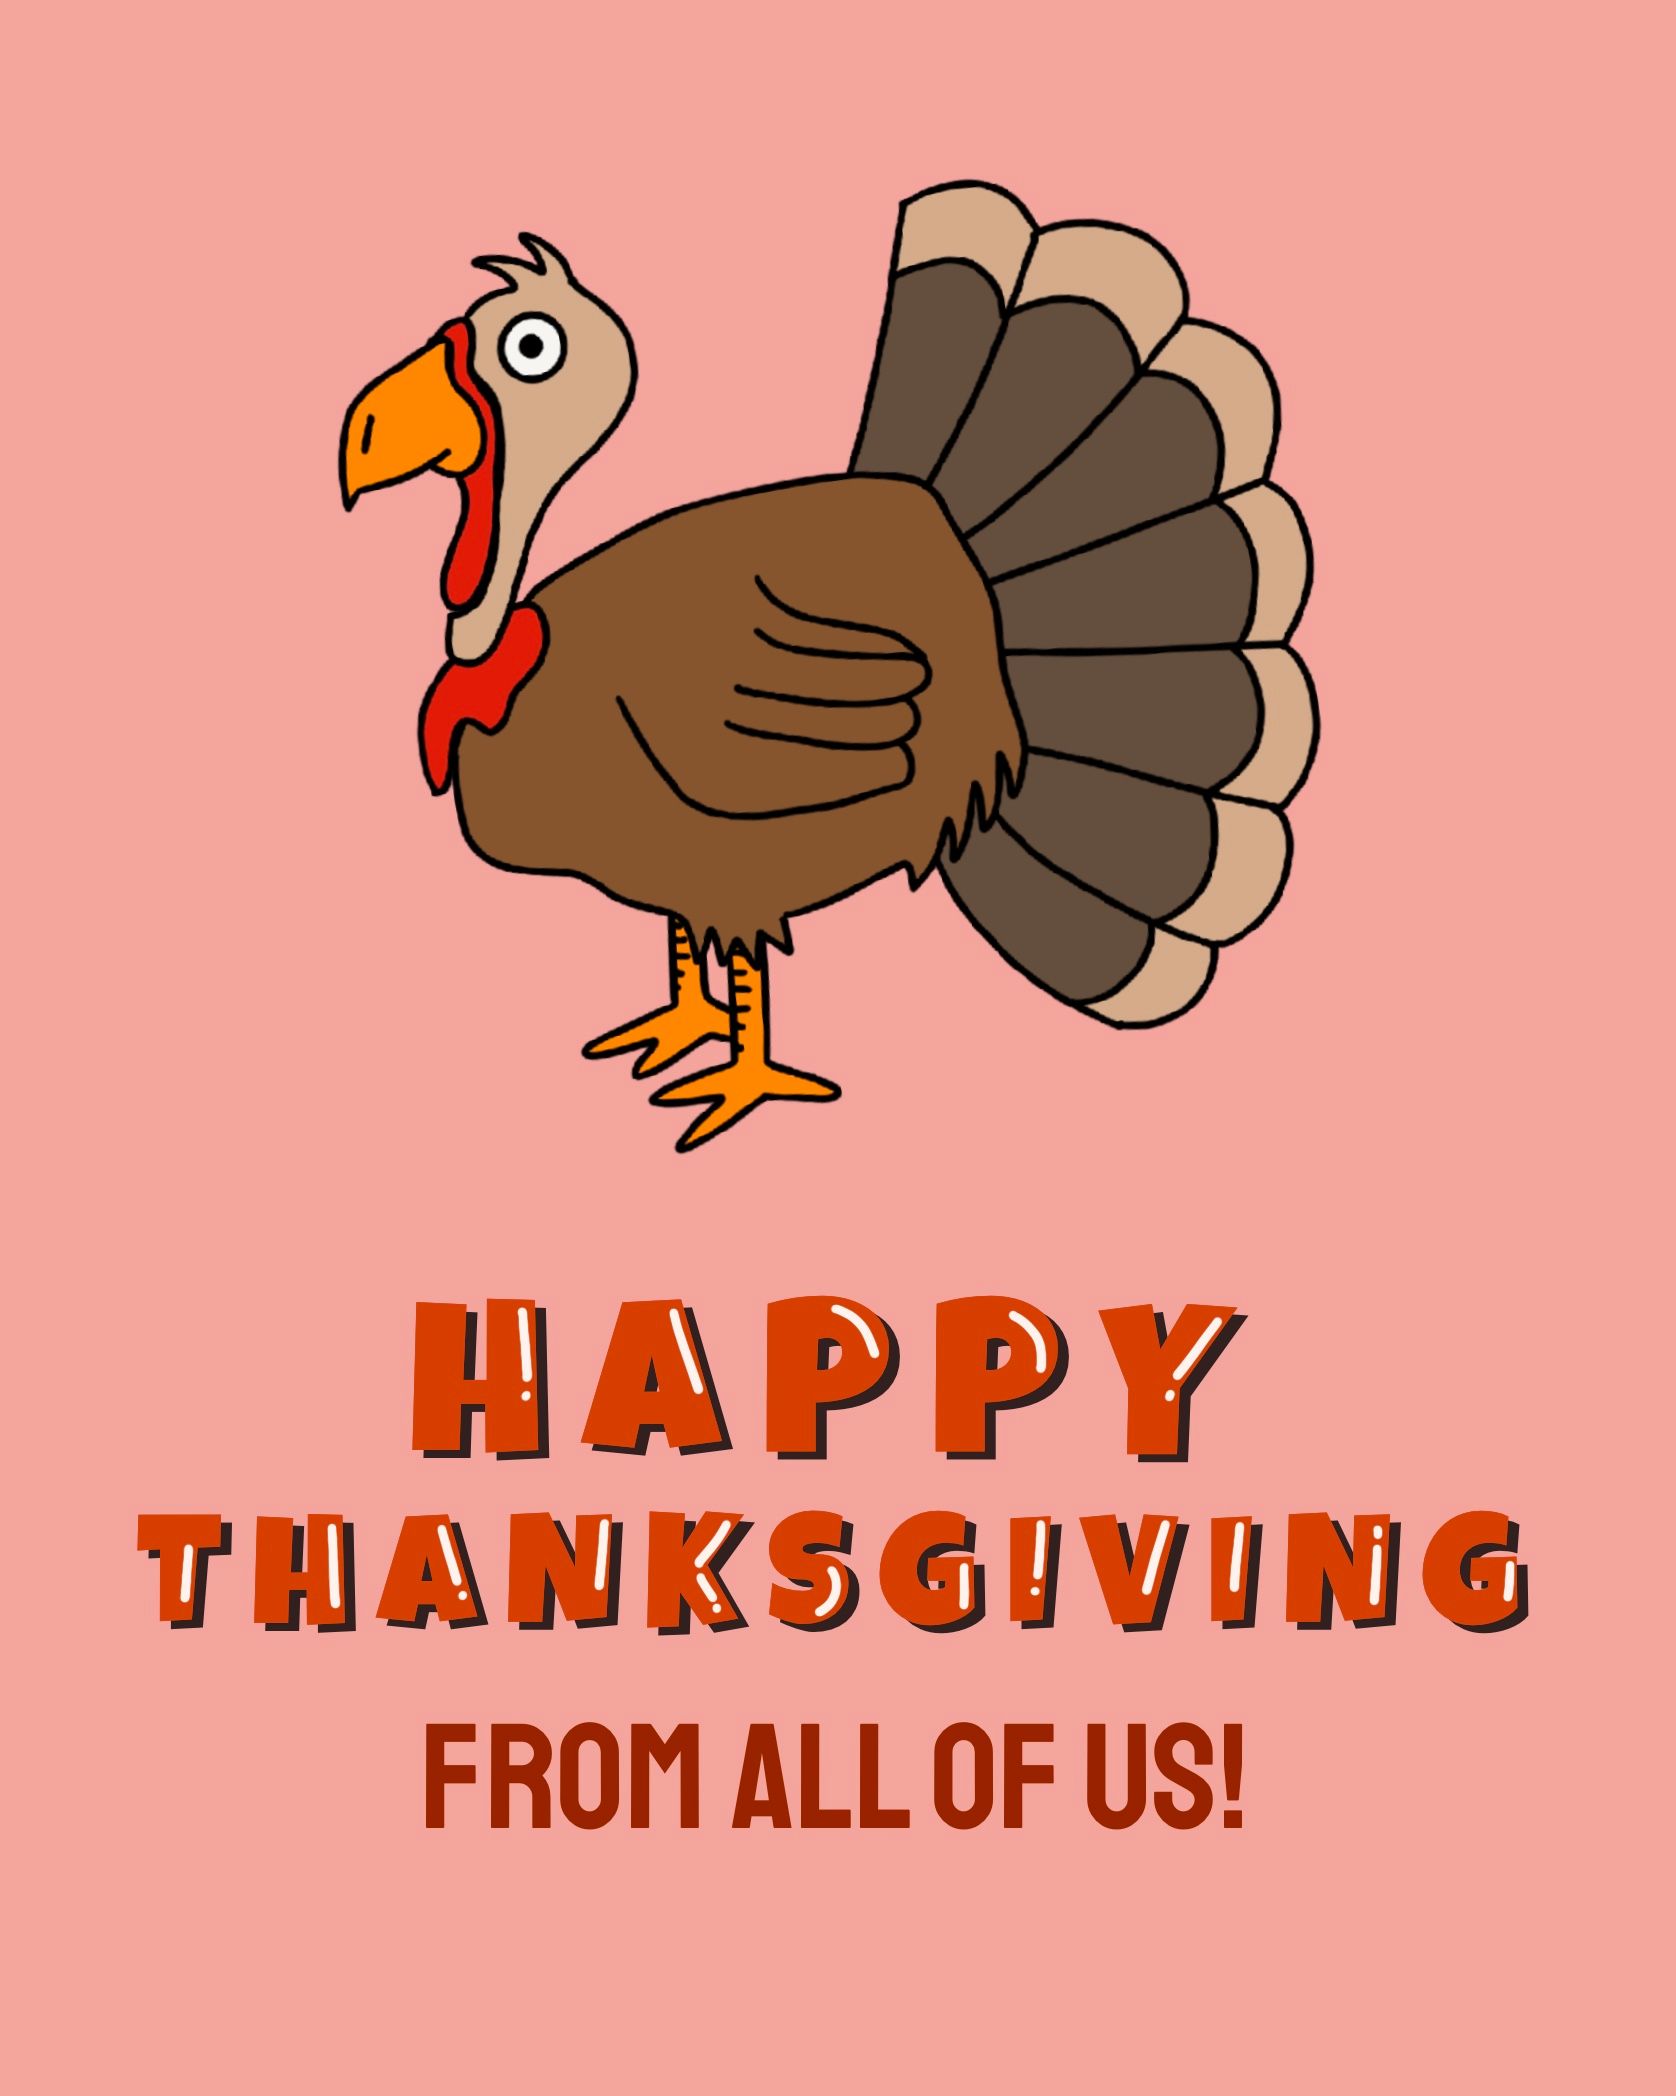 Card design "happy thanksgiving from all of us turkey"